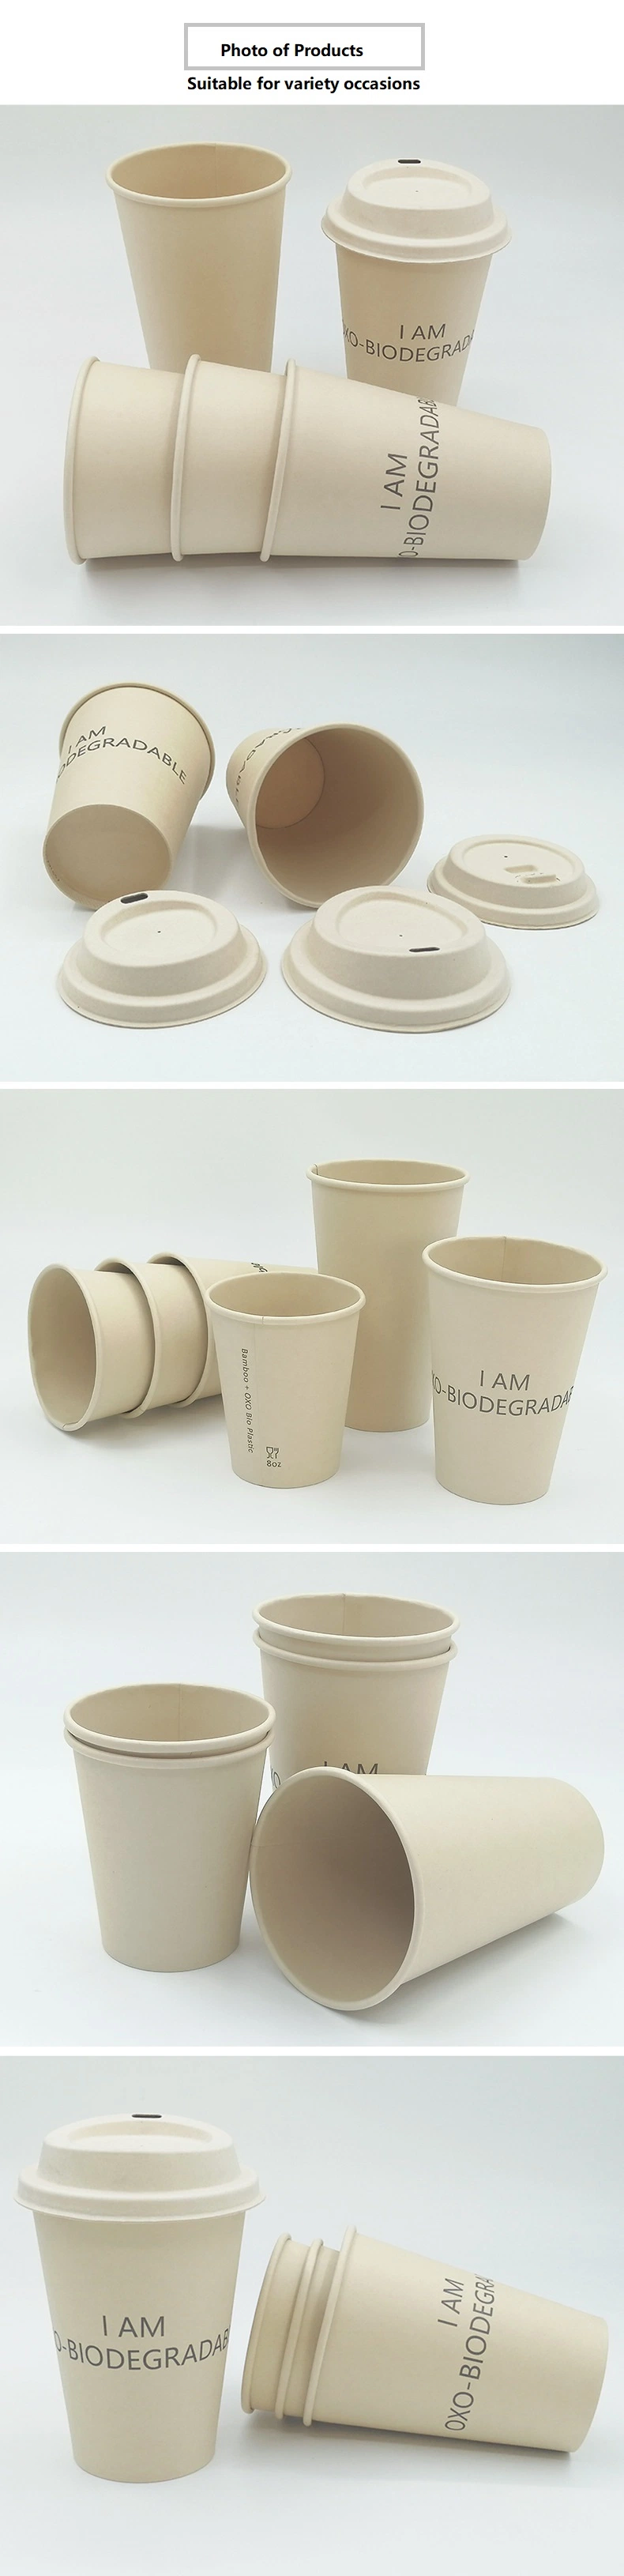 Degradable Compost Cup Coffee Pod Cup with Custom Foil Lid Cups